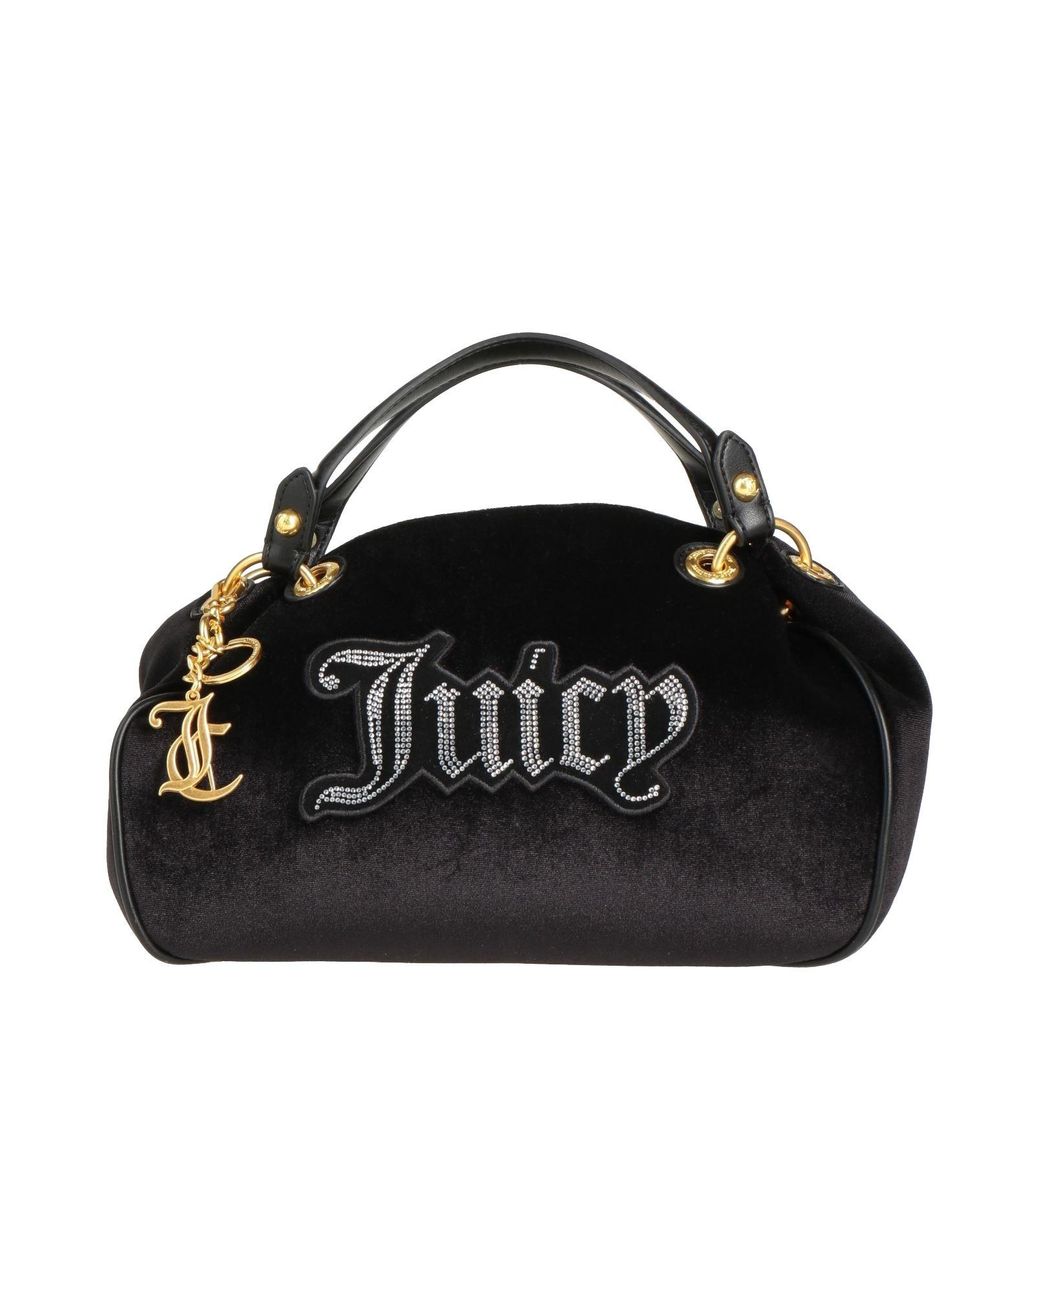 Juicy Couture Black Leather Wristlet W/Gold Crown | Leather wristlet, Juicy  couture wallets, Juicy couture bags